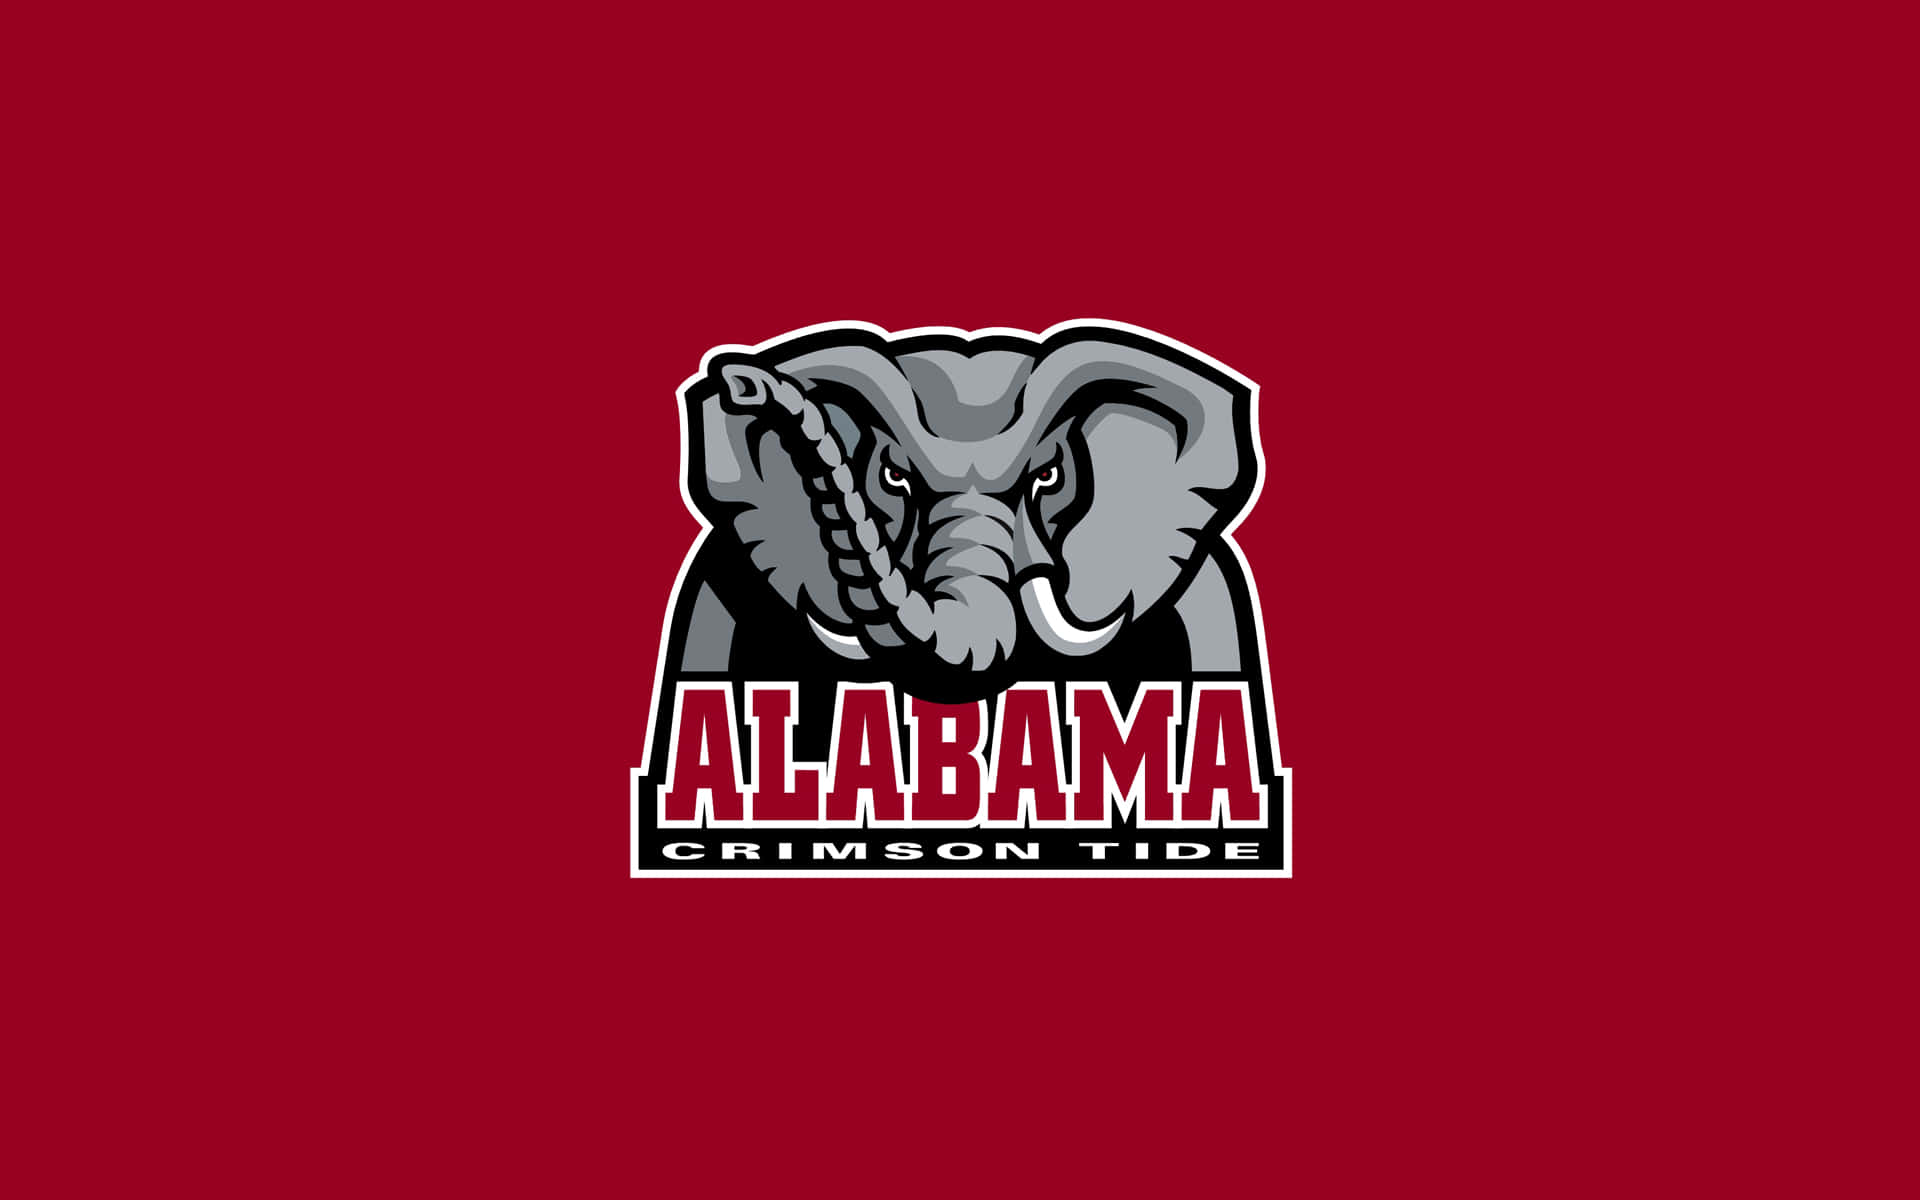 The Crimson Tide proudly stands behind the Alabama Football Logo. Wallpaper